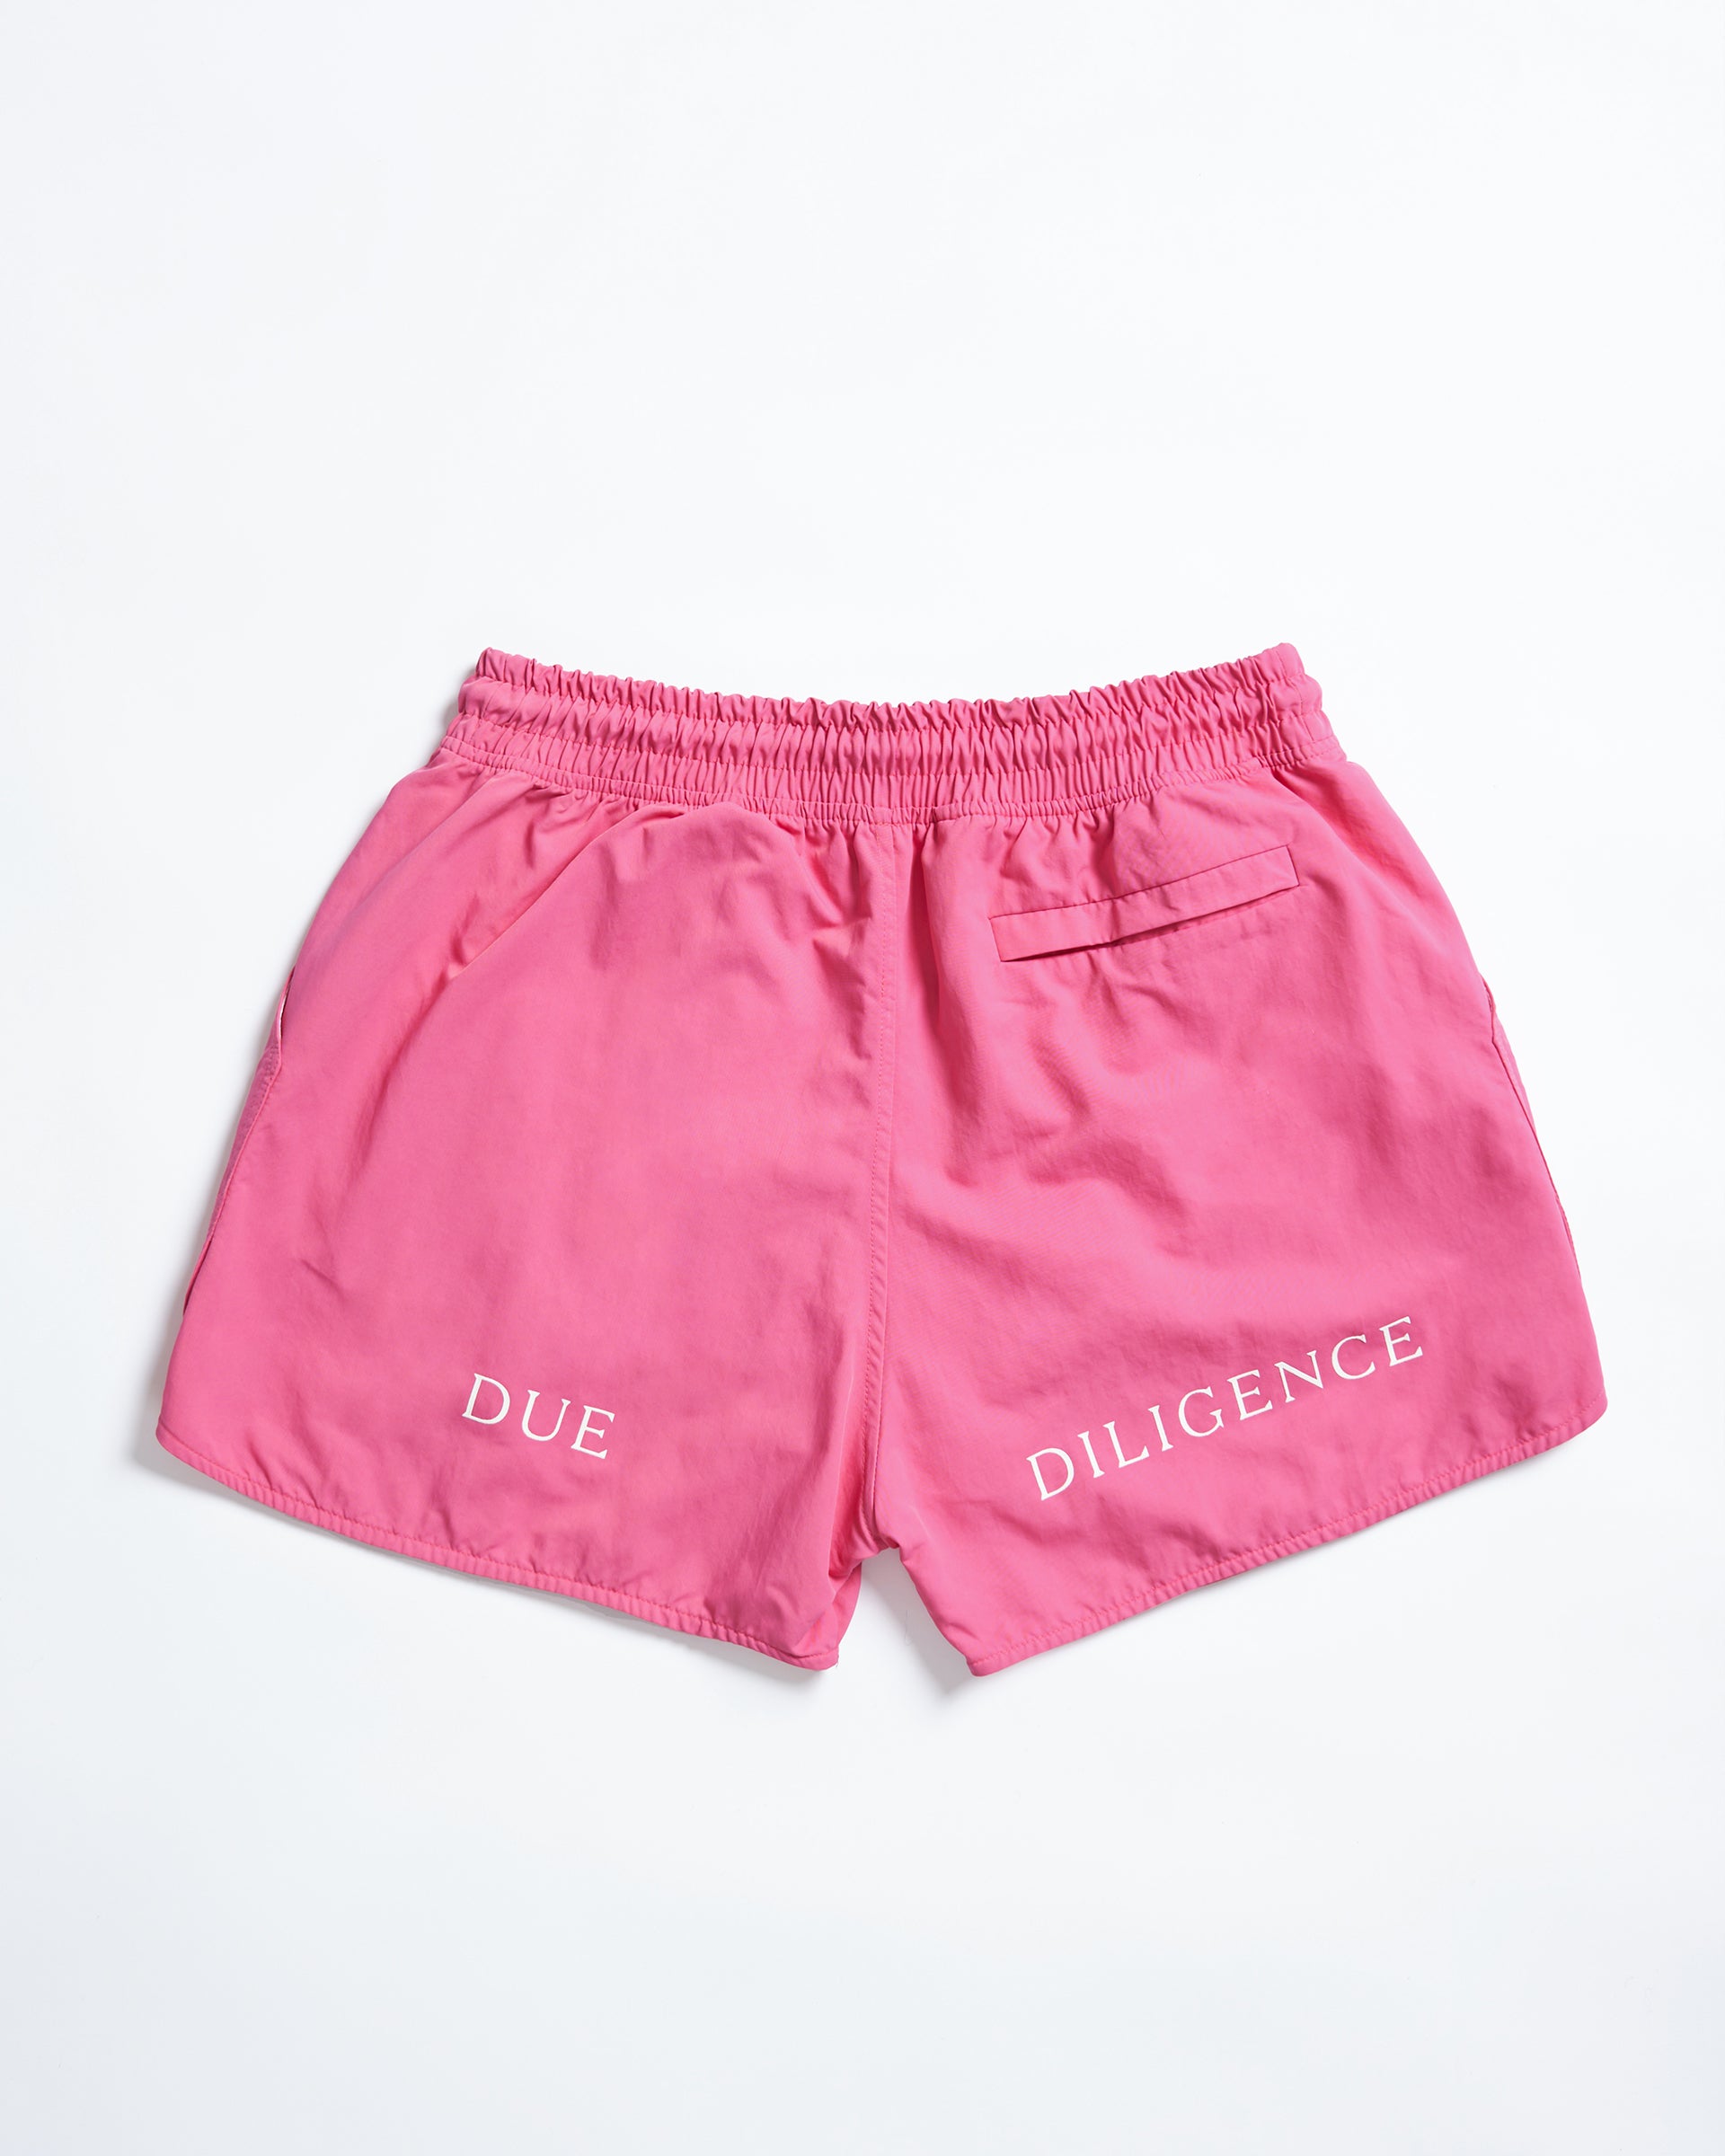 Swim Shorts In Pink Nylon | Due Diligence Apparel